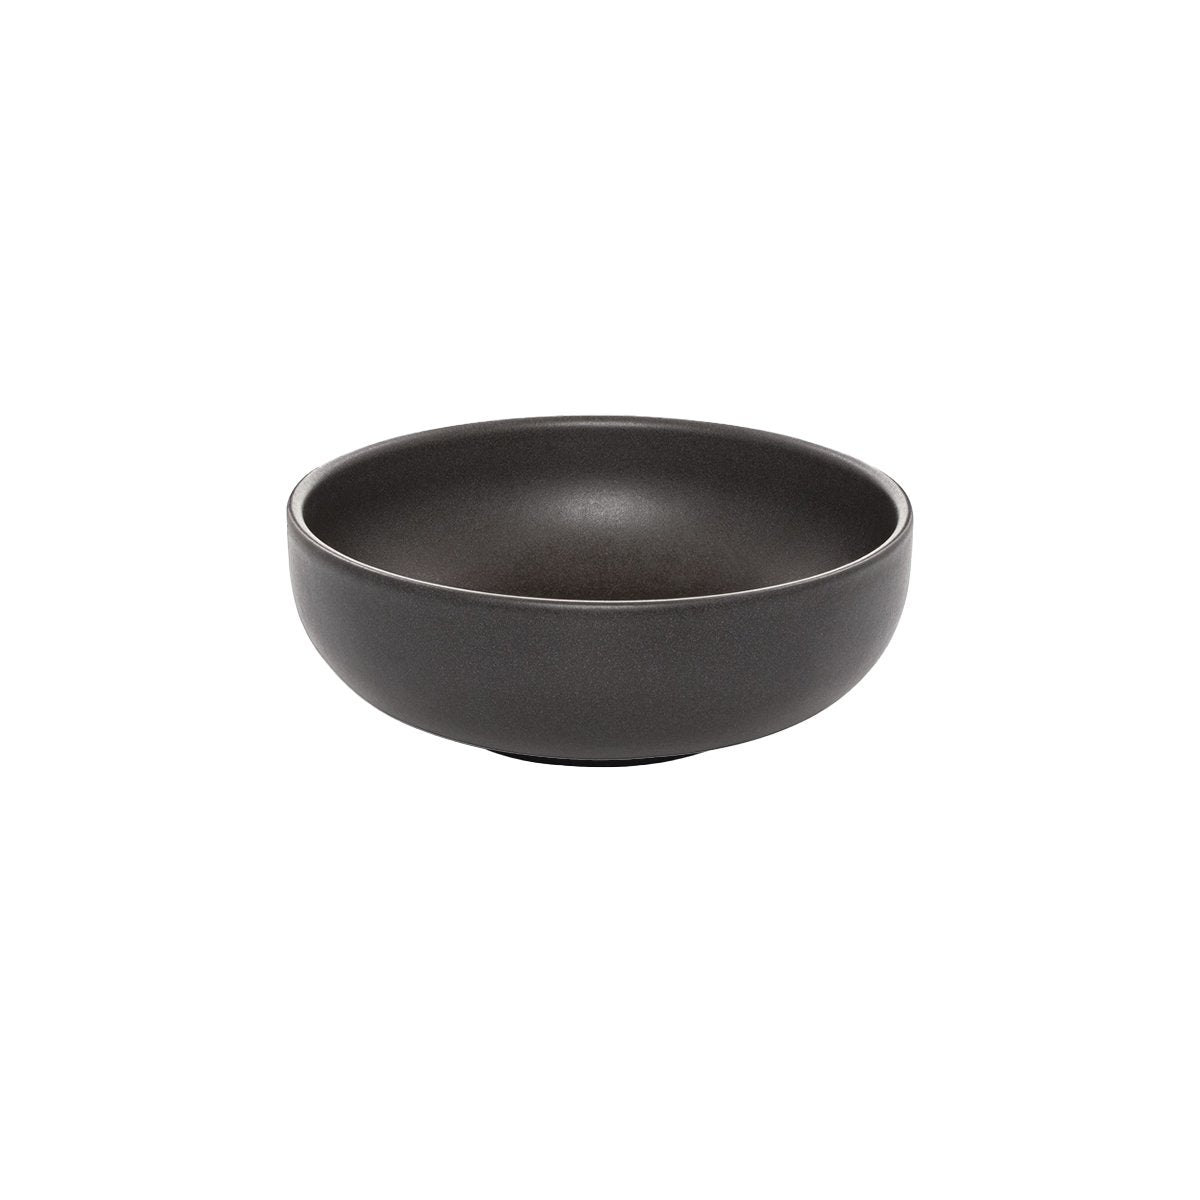 Round Bowl - 125Mm, Black from Eclipse. made out of Ceramic and sold in boxes of 6. Hospitality quality at wholesale price with The Flying Fork! 